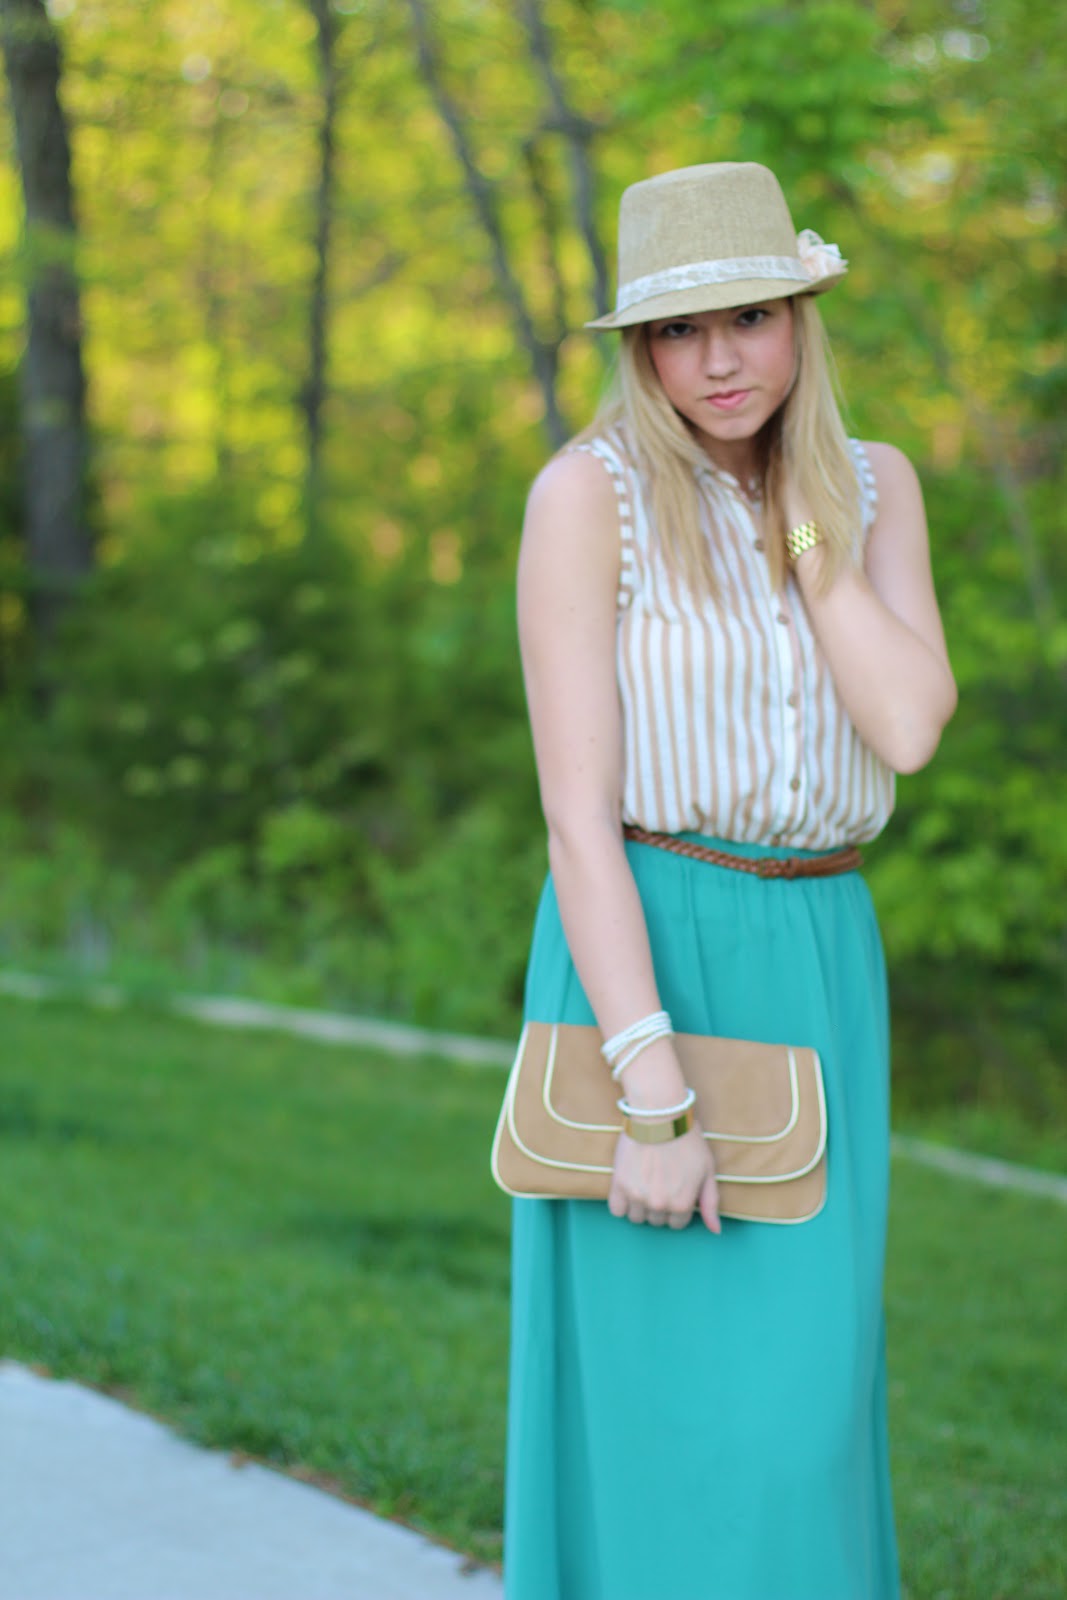 Living in Color | A Life & Style Blog: Outfit Post: Maxi & Stripes ...